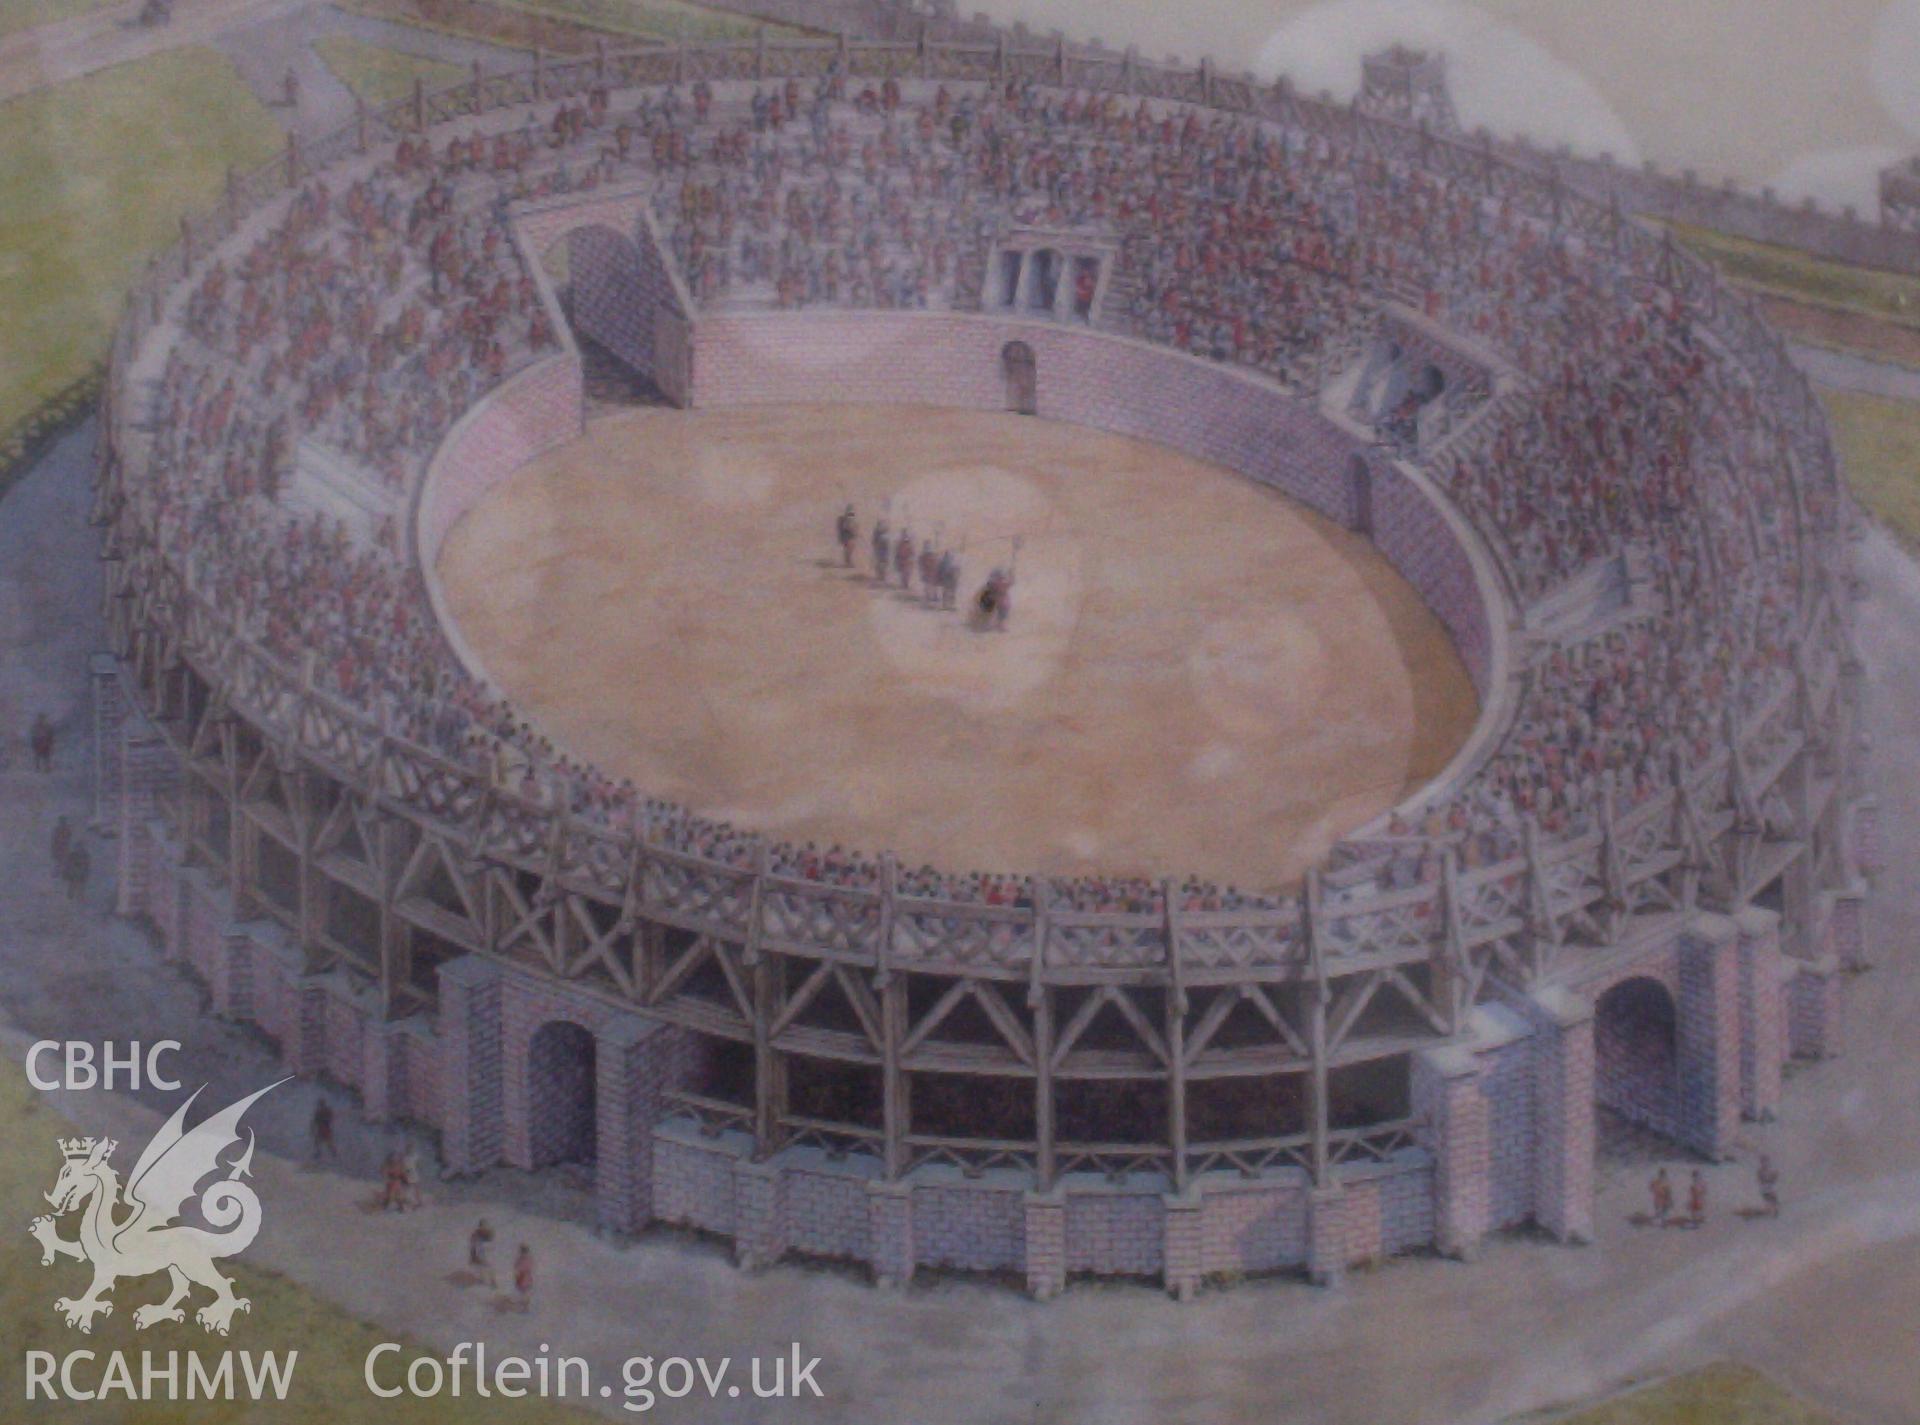 Reconstruction drawing of the amphitheatre on Cadw noticeboard.